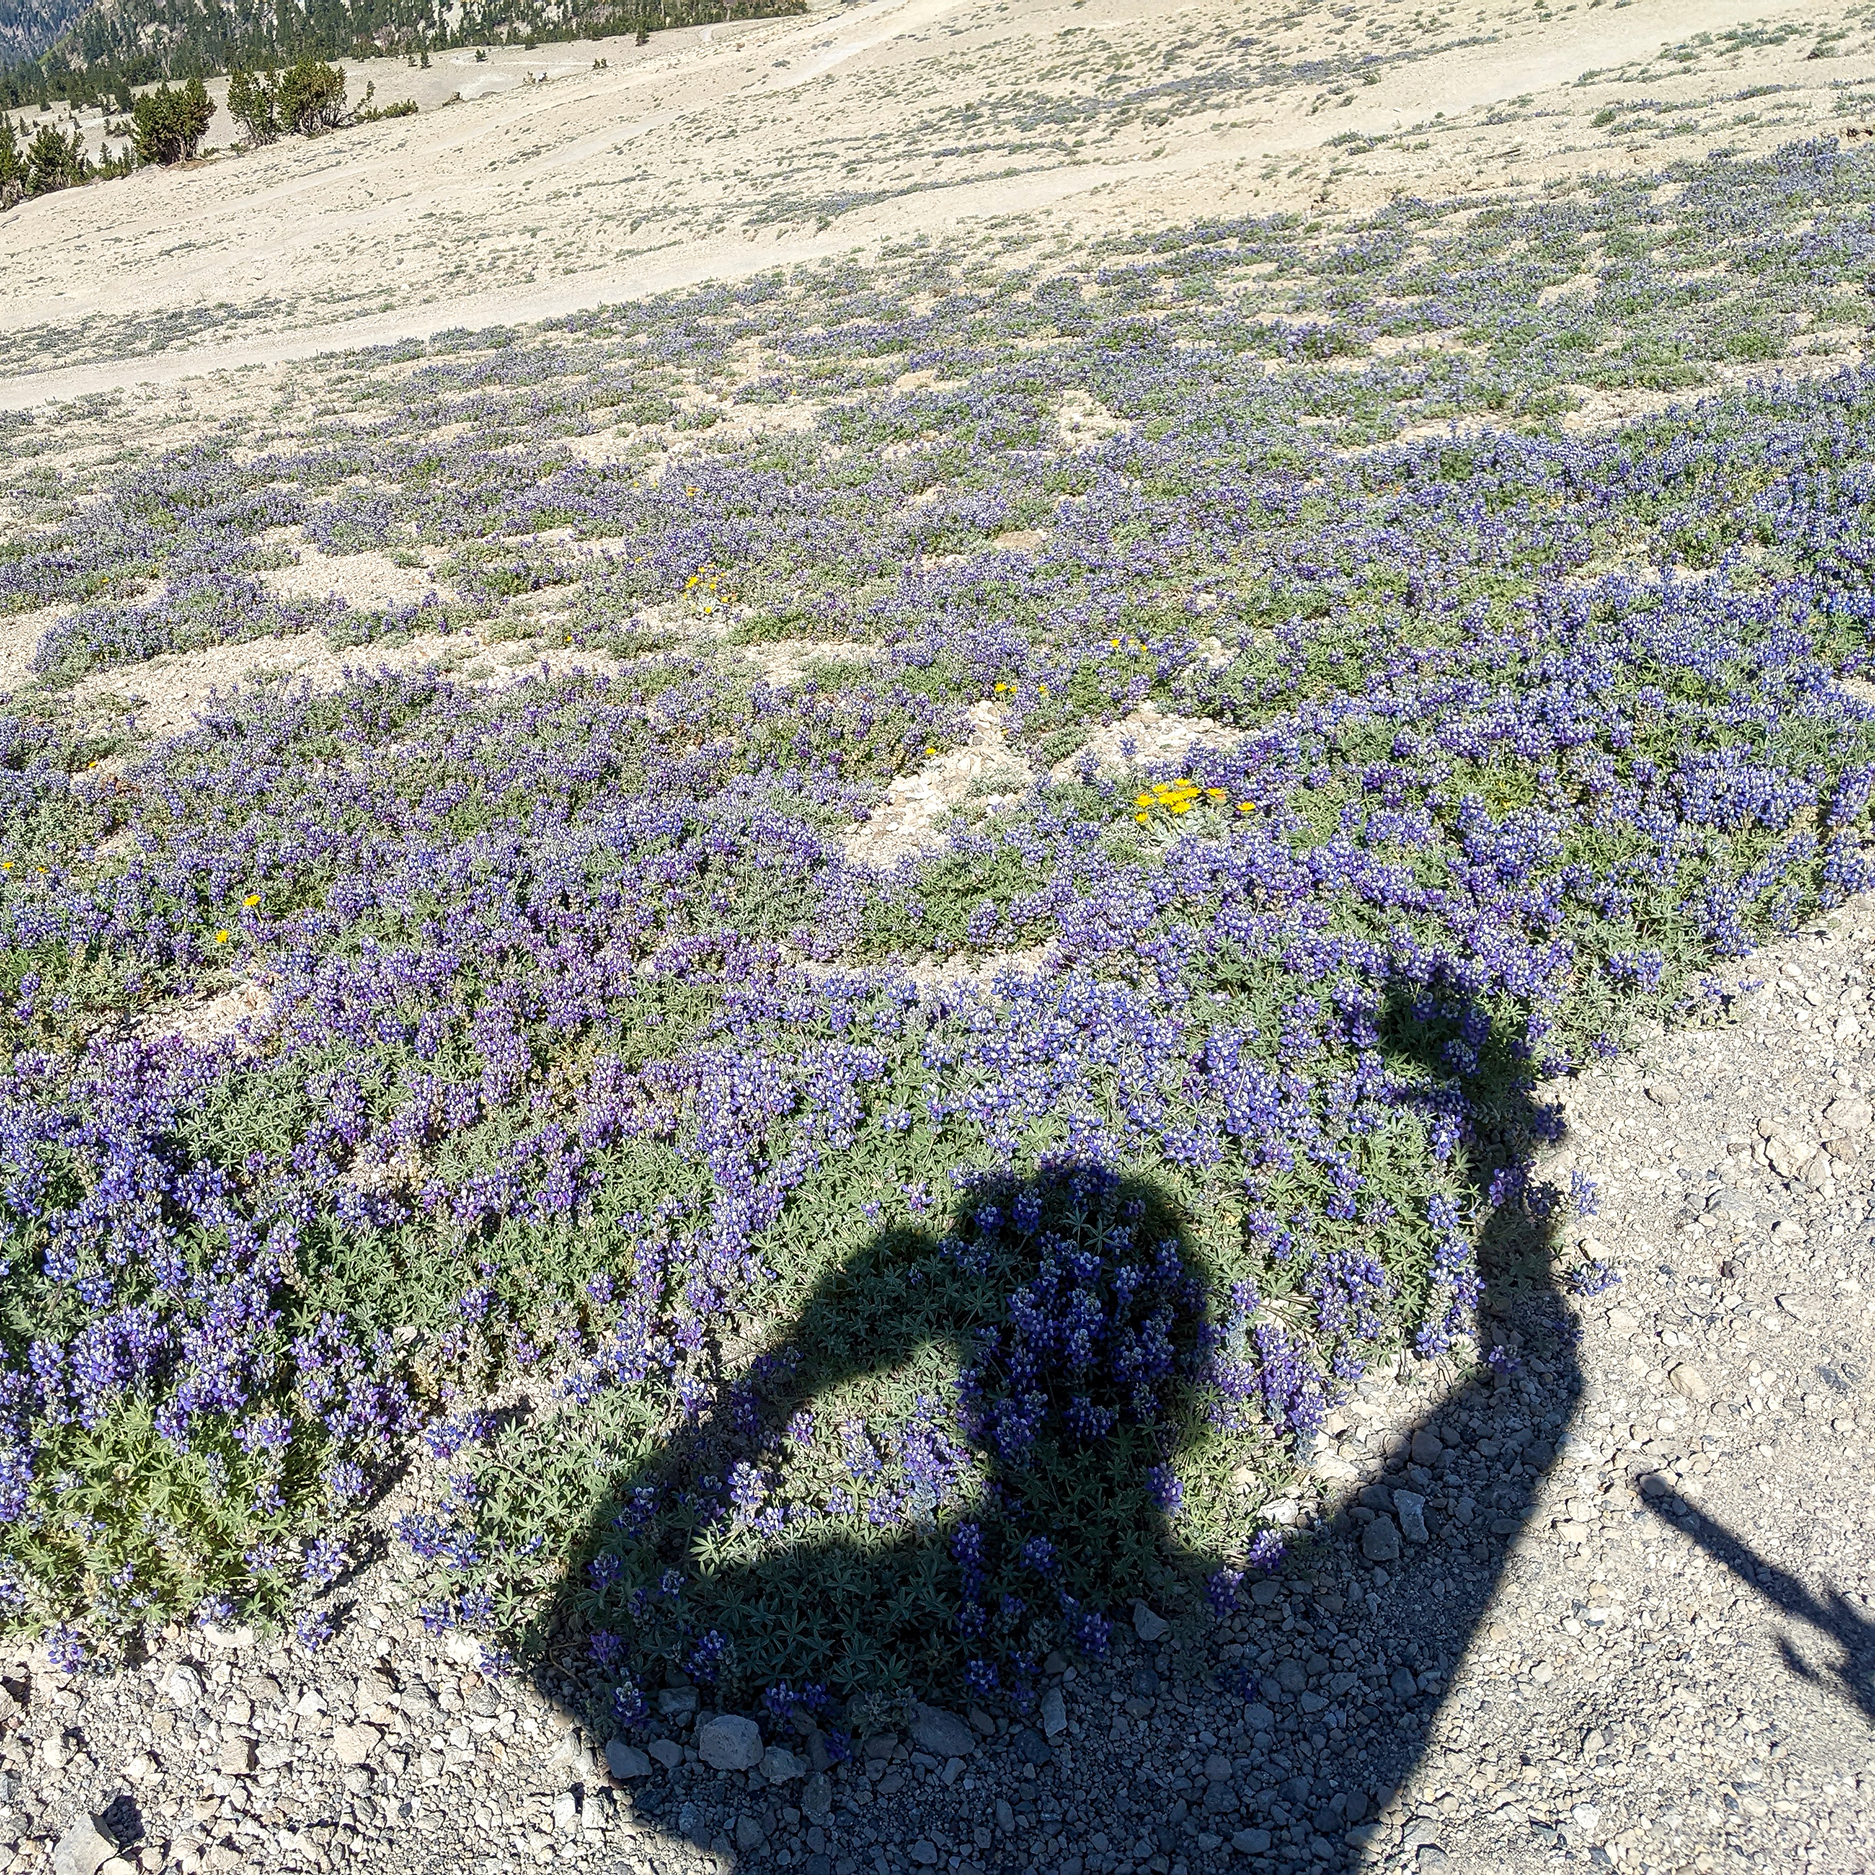 Lupine at 10,500 feet on the back side of Mammoth Mountain